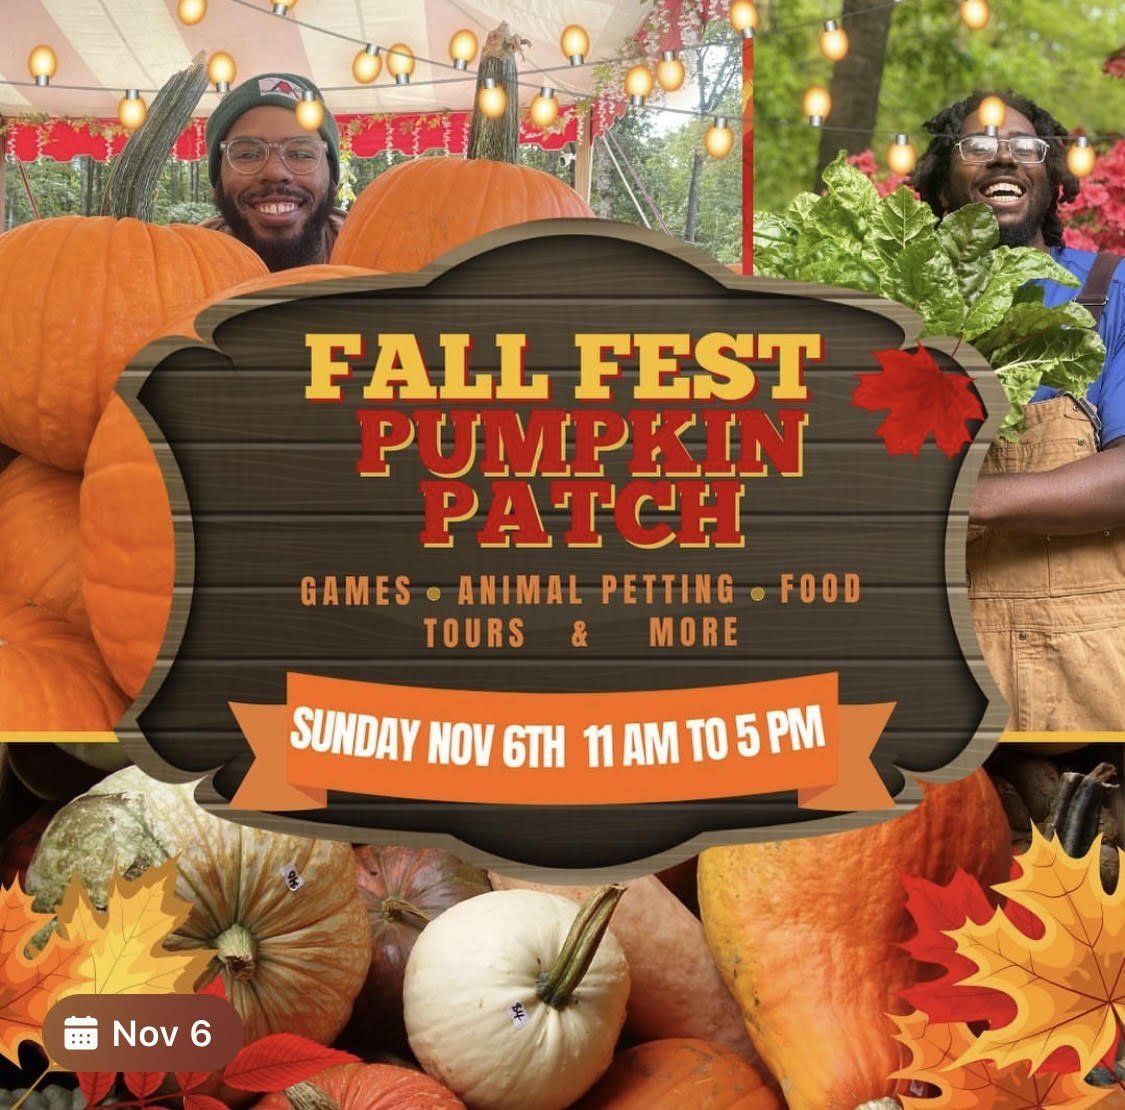 Previous Happening: Fall Fest Pumpkin Patch on Sunday November 6th!